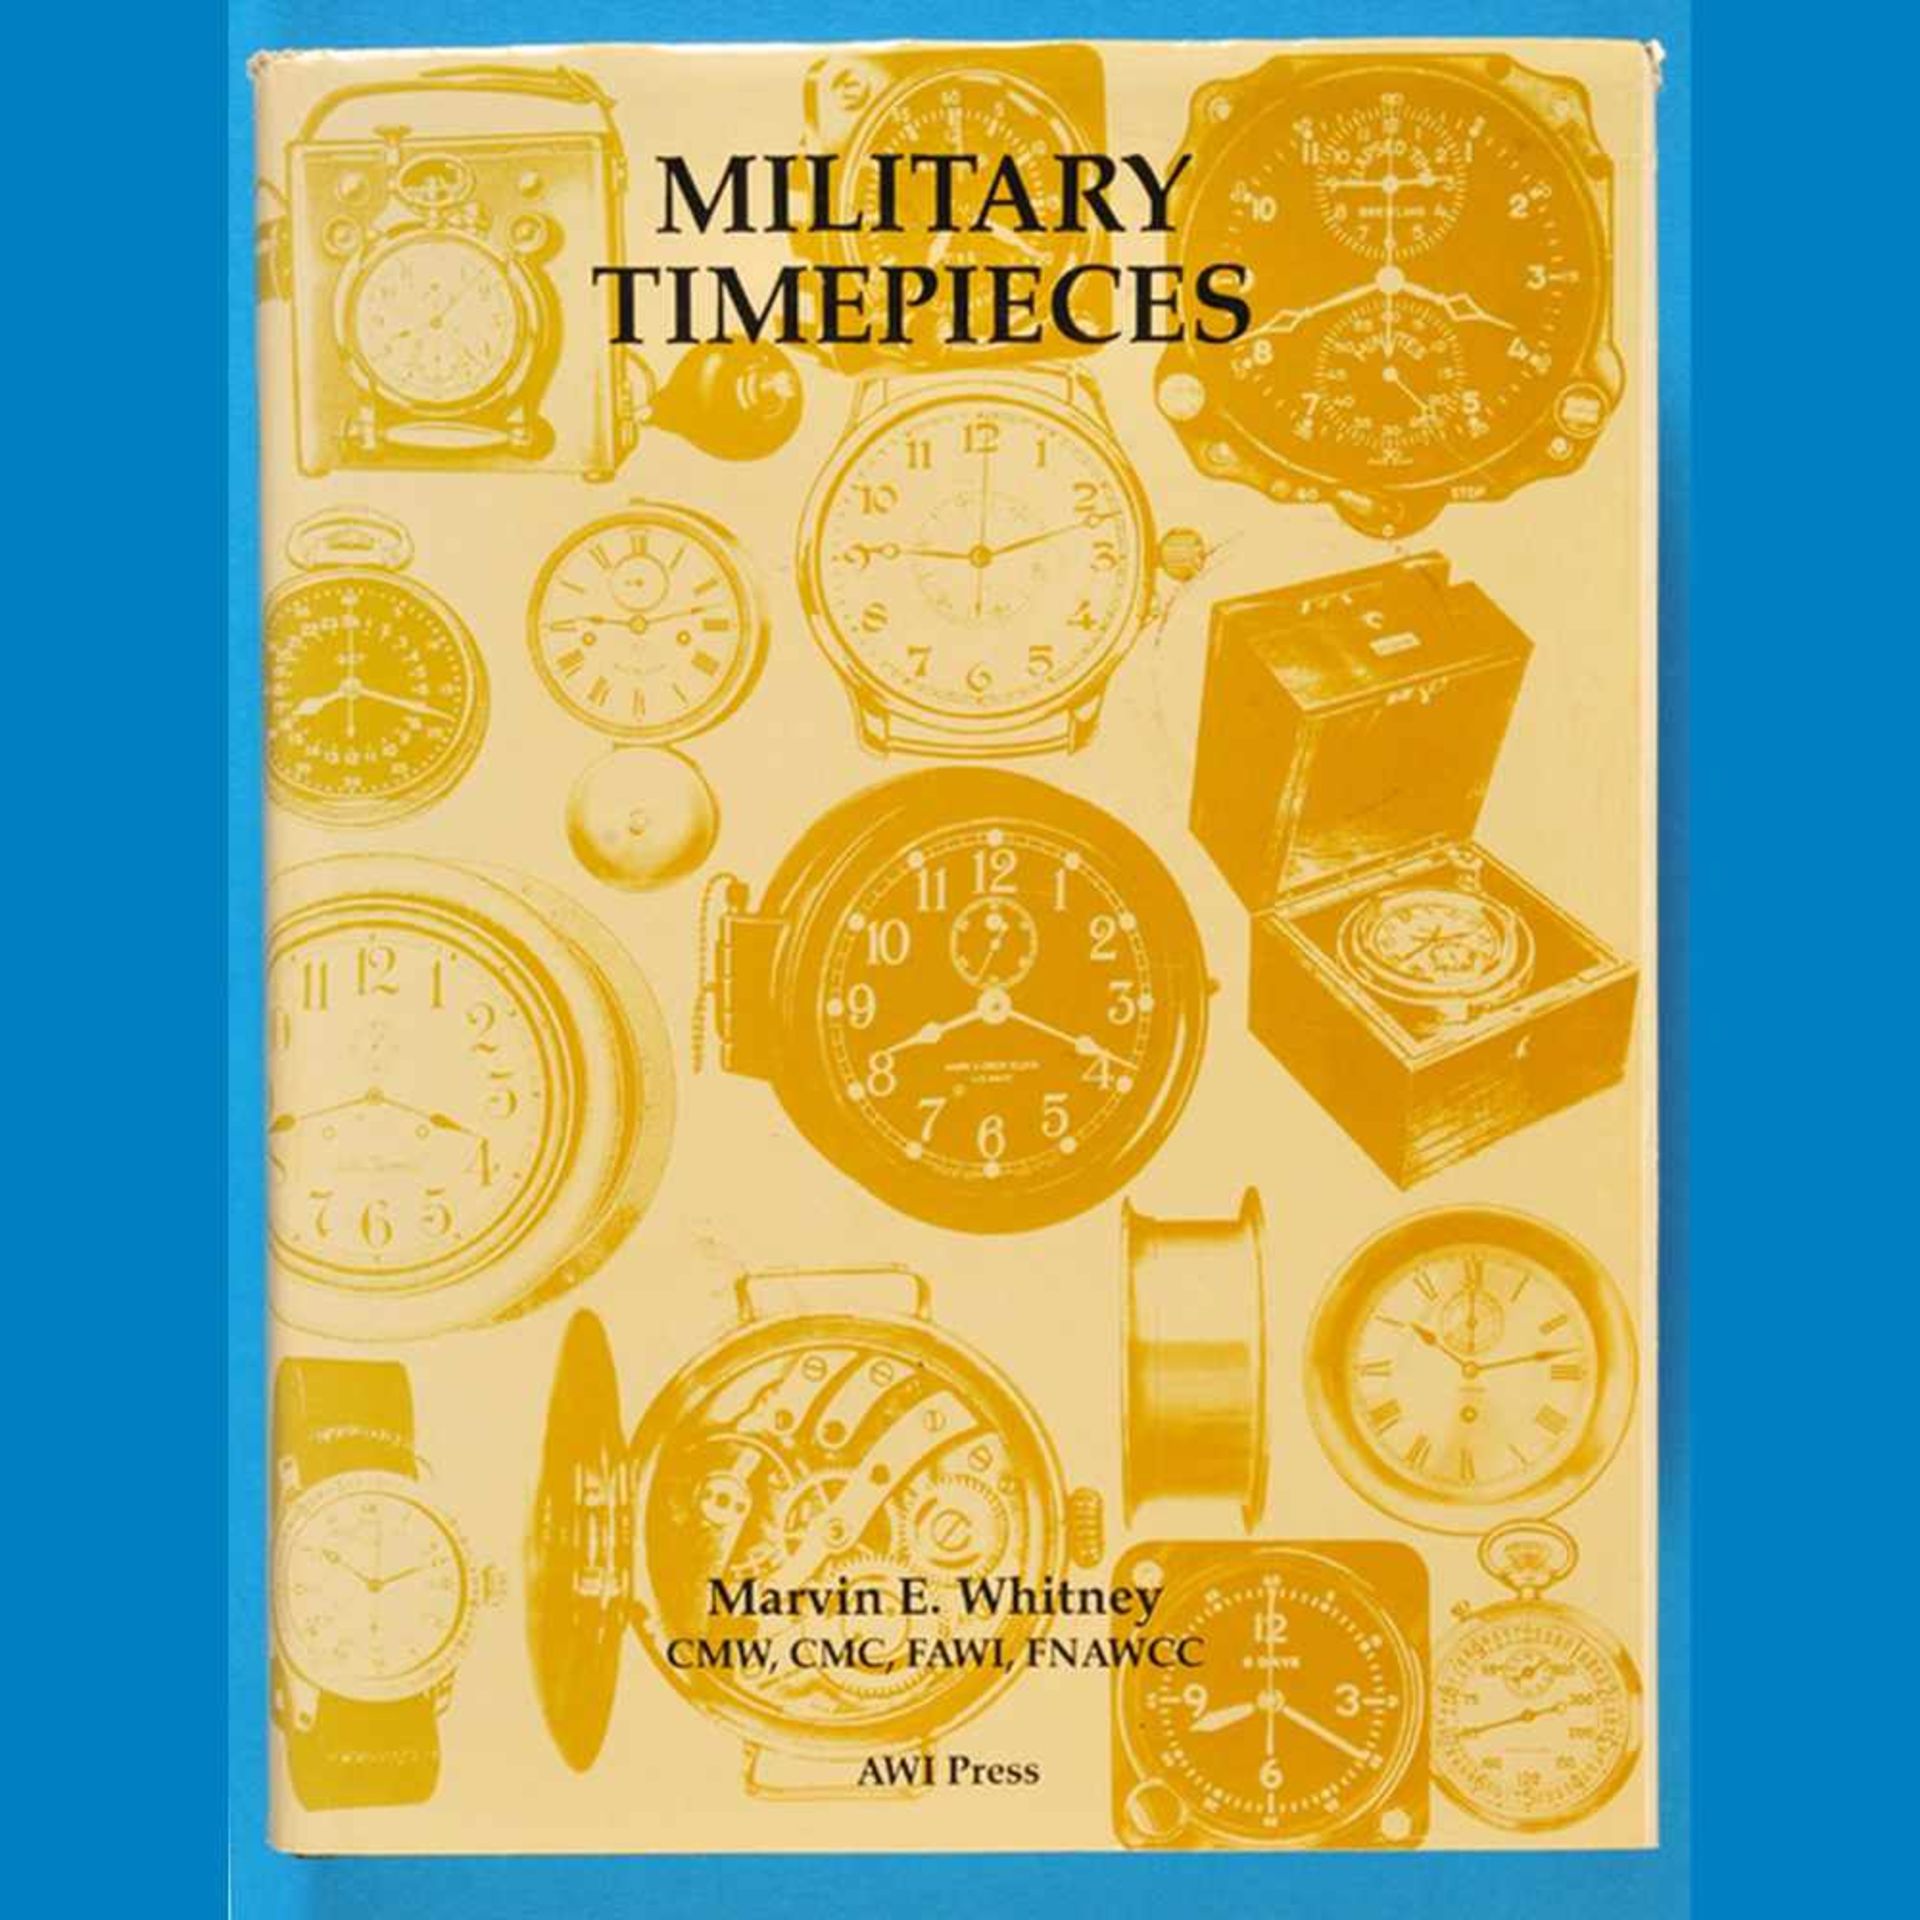 Marvin E. Whitney, Military Timepieces, 1992Marvin E. Whitney, Military Timepieces, 1992, 6